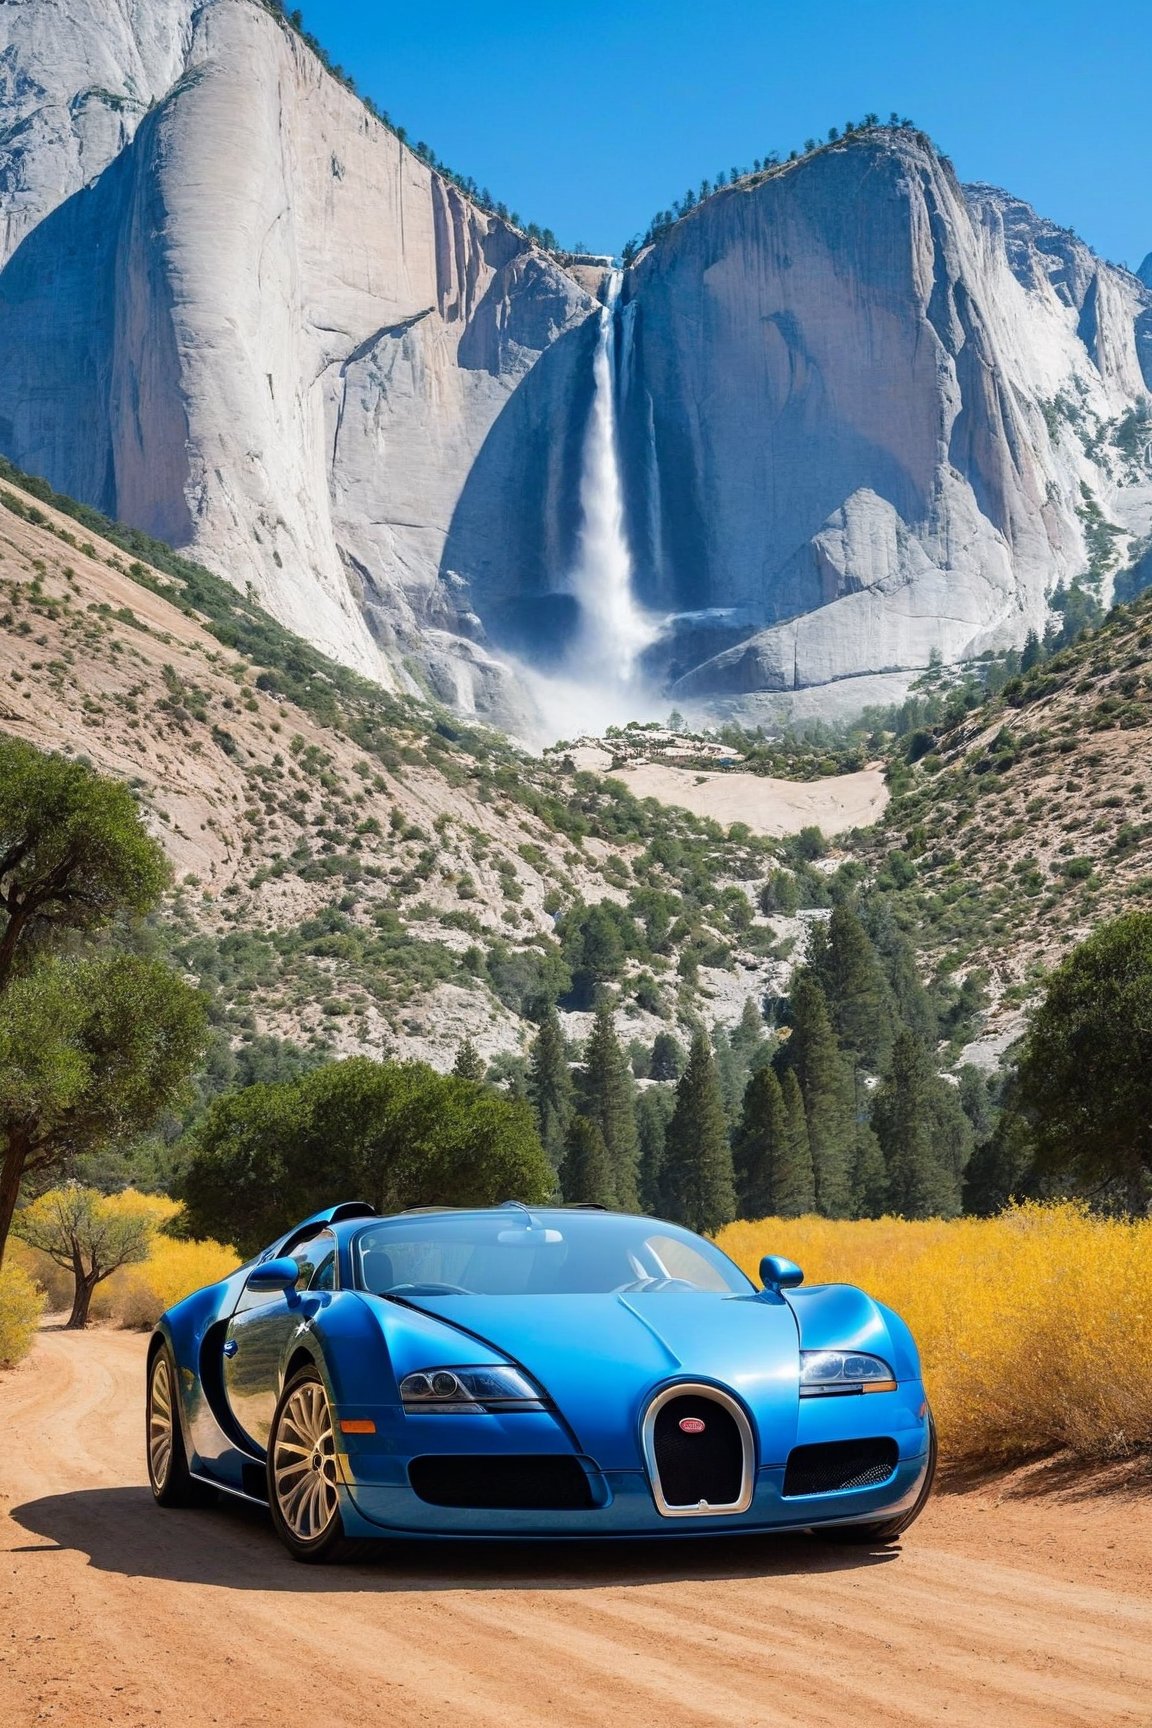 ((Hyper-Realistic)) photo of 1 car \(1999 Bugatti Veyron EB 16.4 designed by Walter de Silva\) parked,(backdrop: national park with mountain,(rock),tree),Front side view,well-lit
BREAK 
aesthetic,rule of thirds,depth of perspective,perfect composition,studio photo,trending on artstation,cinematic lighting,(Hyper-realistic photography,masterpiece, photorealistic,ultra-detailed,intricate details,16K,sharp focus,high contrast,kodachrome 800,HDR:1.3), real_booster,art_booster,ani_booster,H effect,y0sem1te, ygalc1er